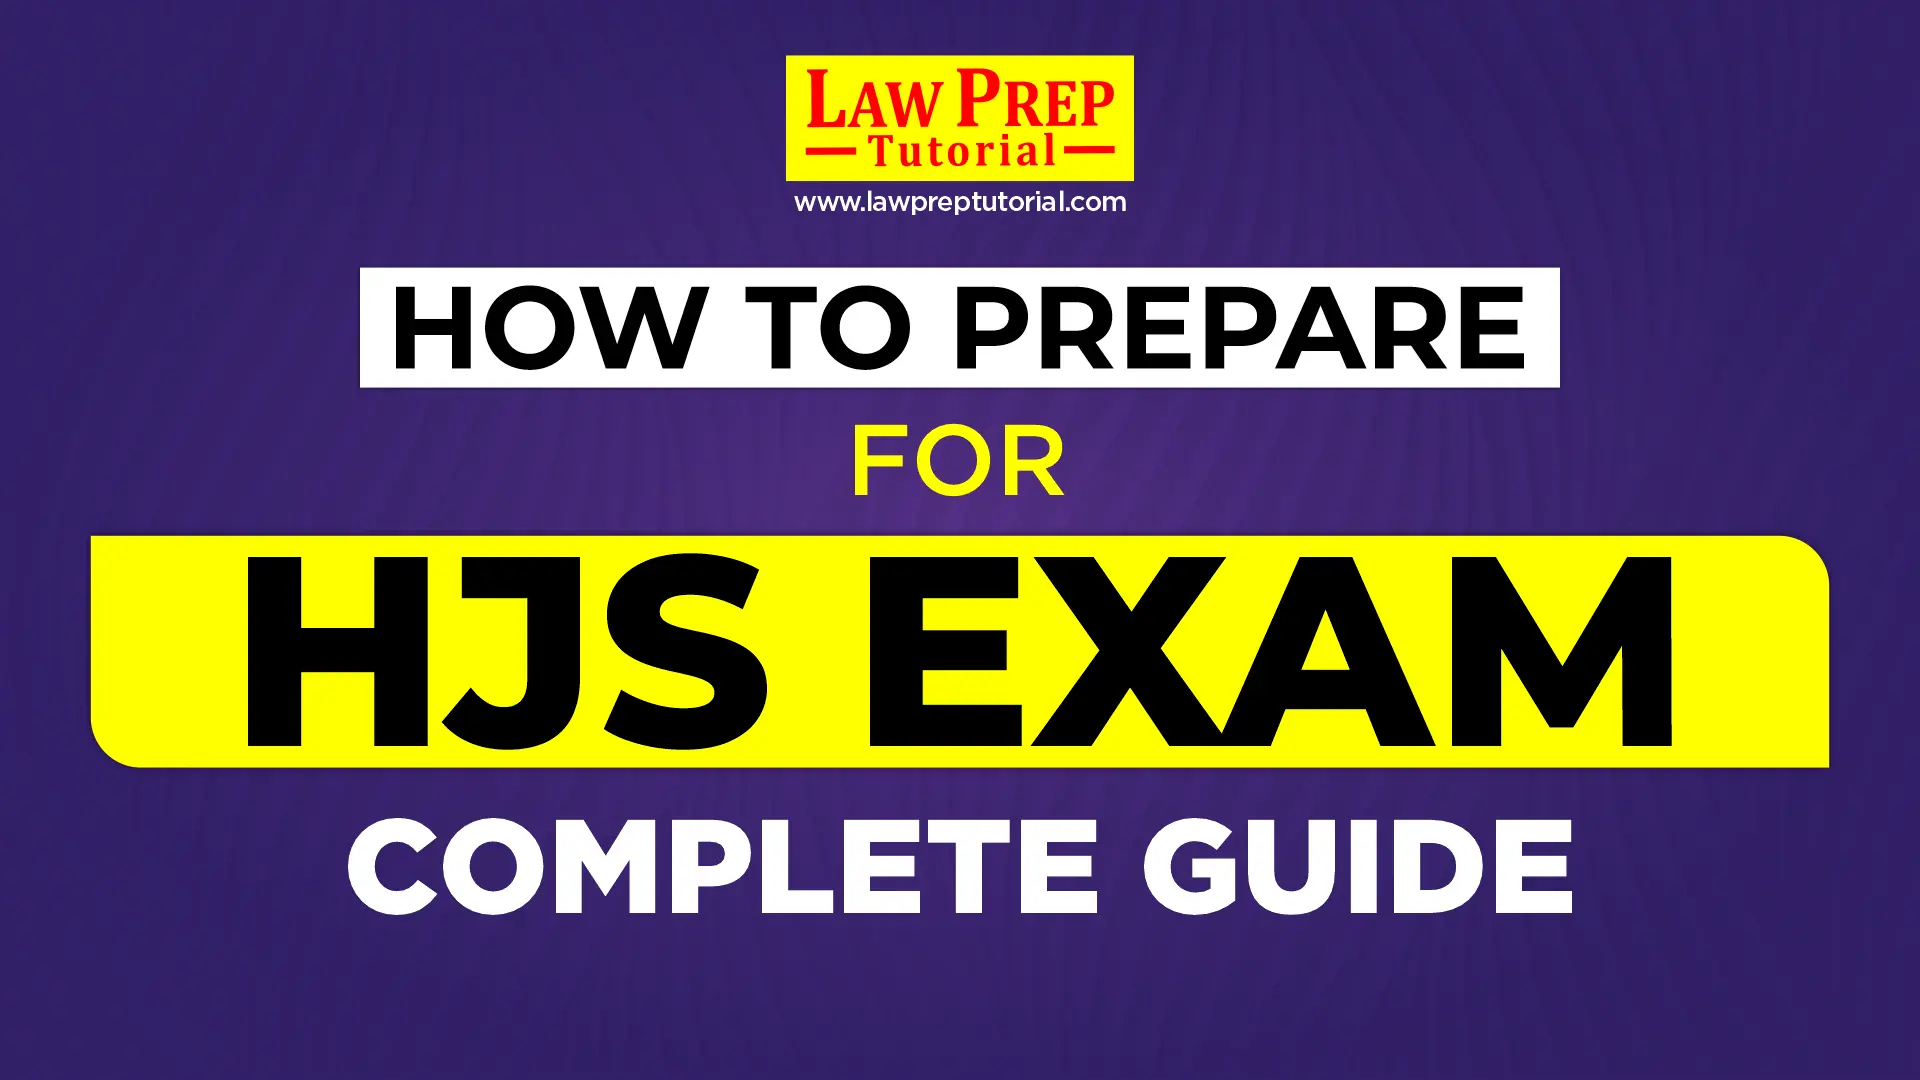 How To Prepare For HJS Exam – Complete Guide